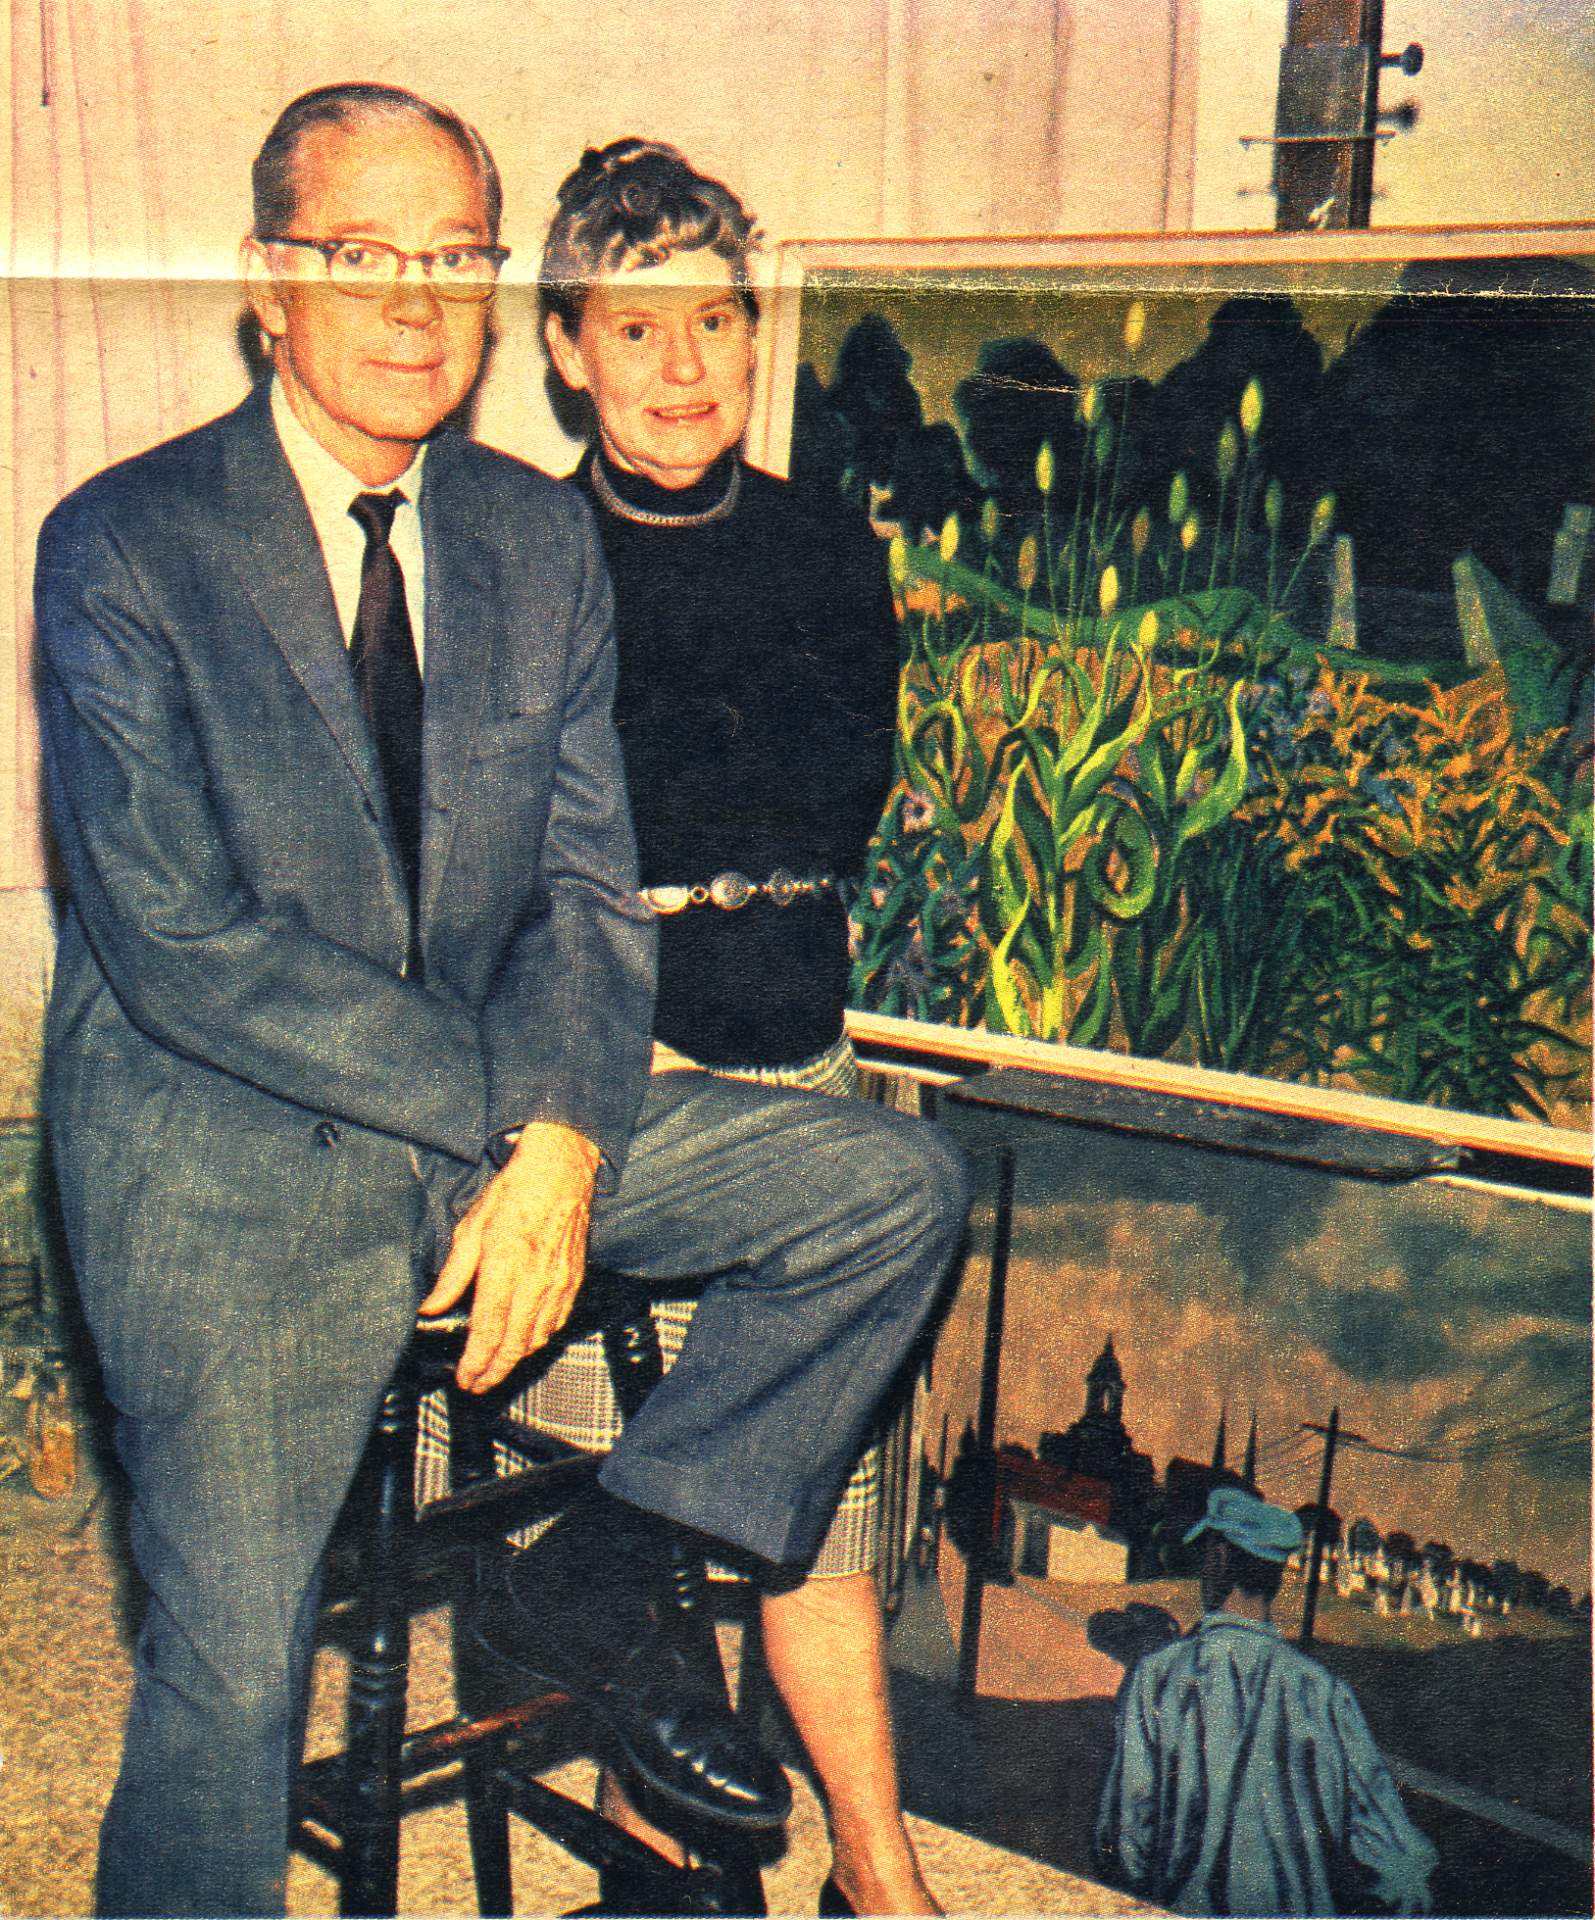 Photograph Philip Elliott and Virginia Cuthbert from Courier Express newspaper article 11/17/1971